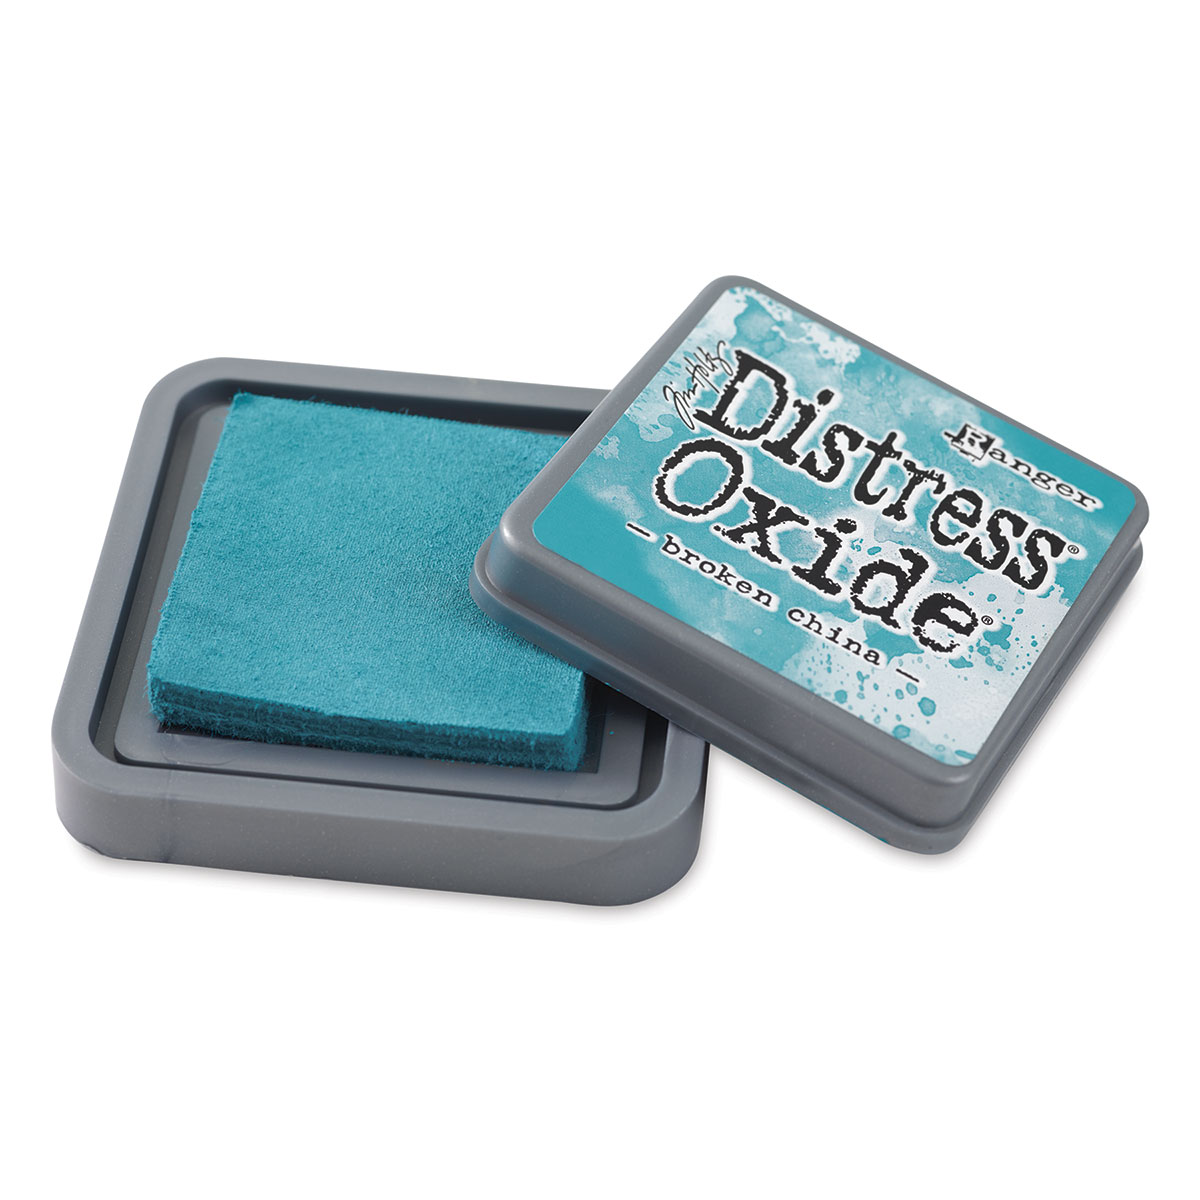 Tim Holtz Distress Ink Pads (View Colors)